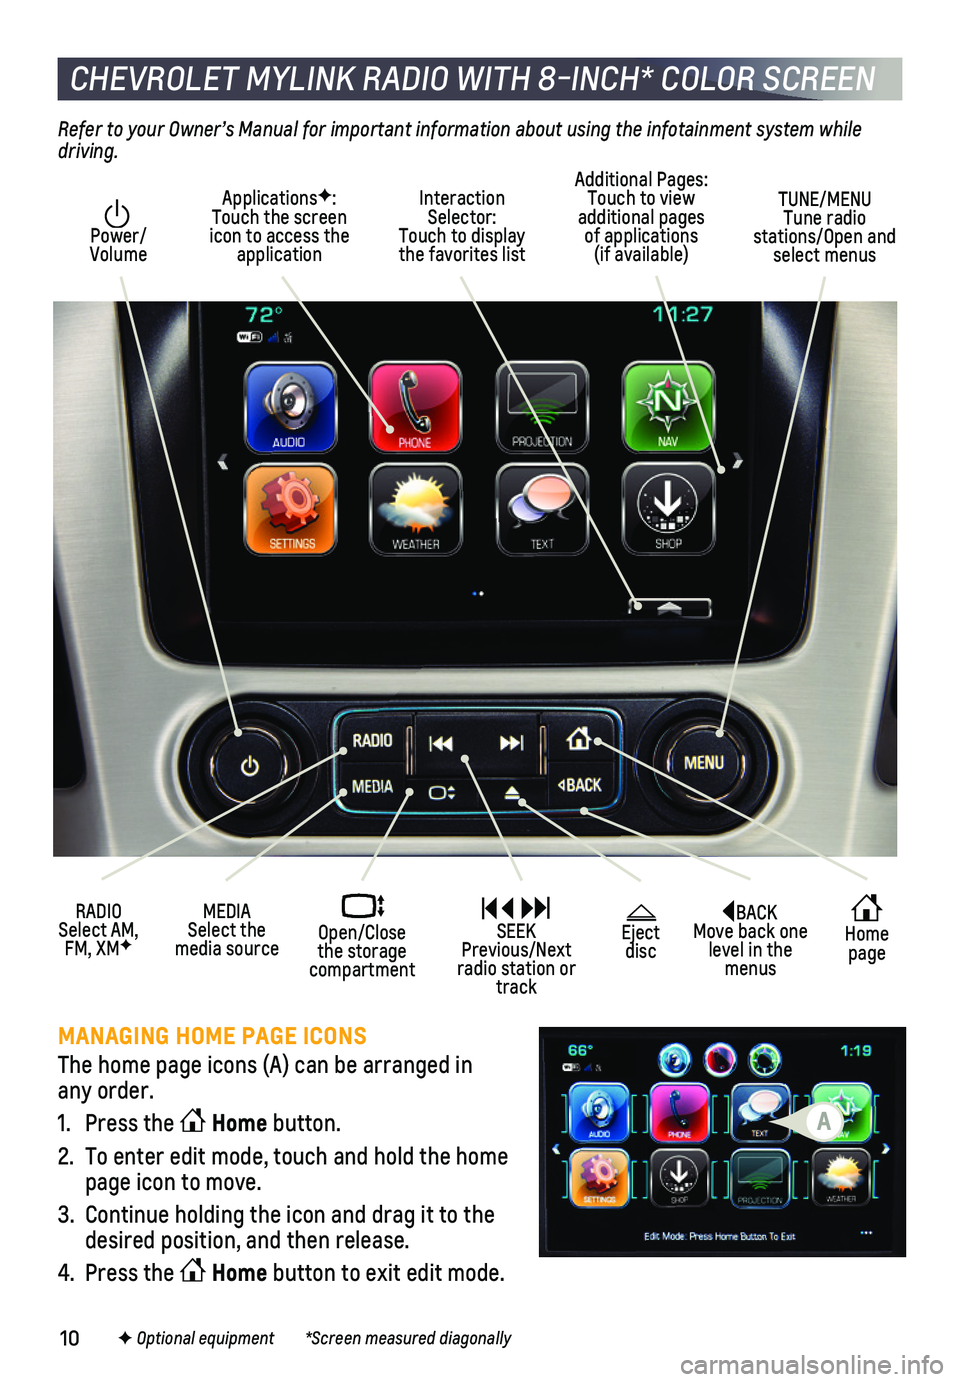 CHEVROLET TAHOE 2018  Get To Know Guide 10
BACK  Move back one level in the menus
 Home page
 Eject disc
Interaction Selector:  Touch to display the favorites list
TUNE/MENU  Tune radio stations/Open and select menus
ApplicationsF: Touch th